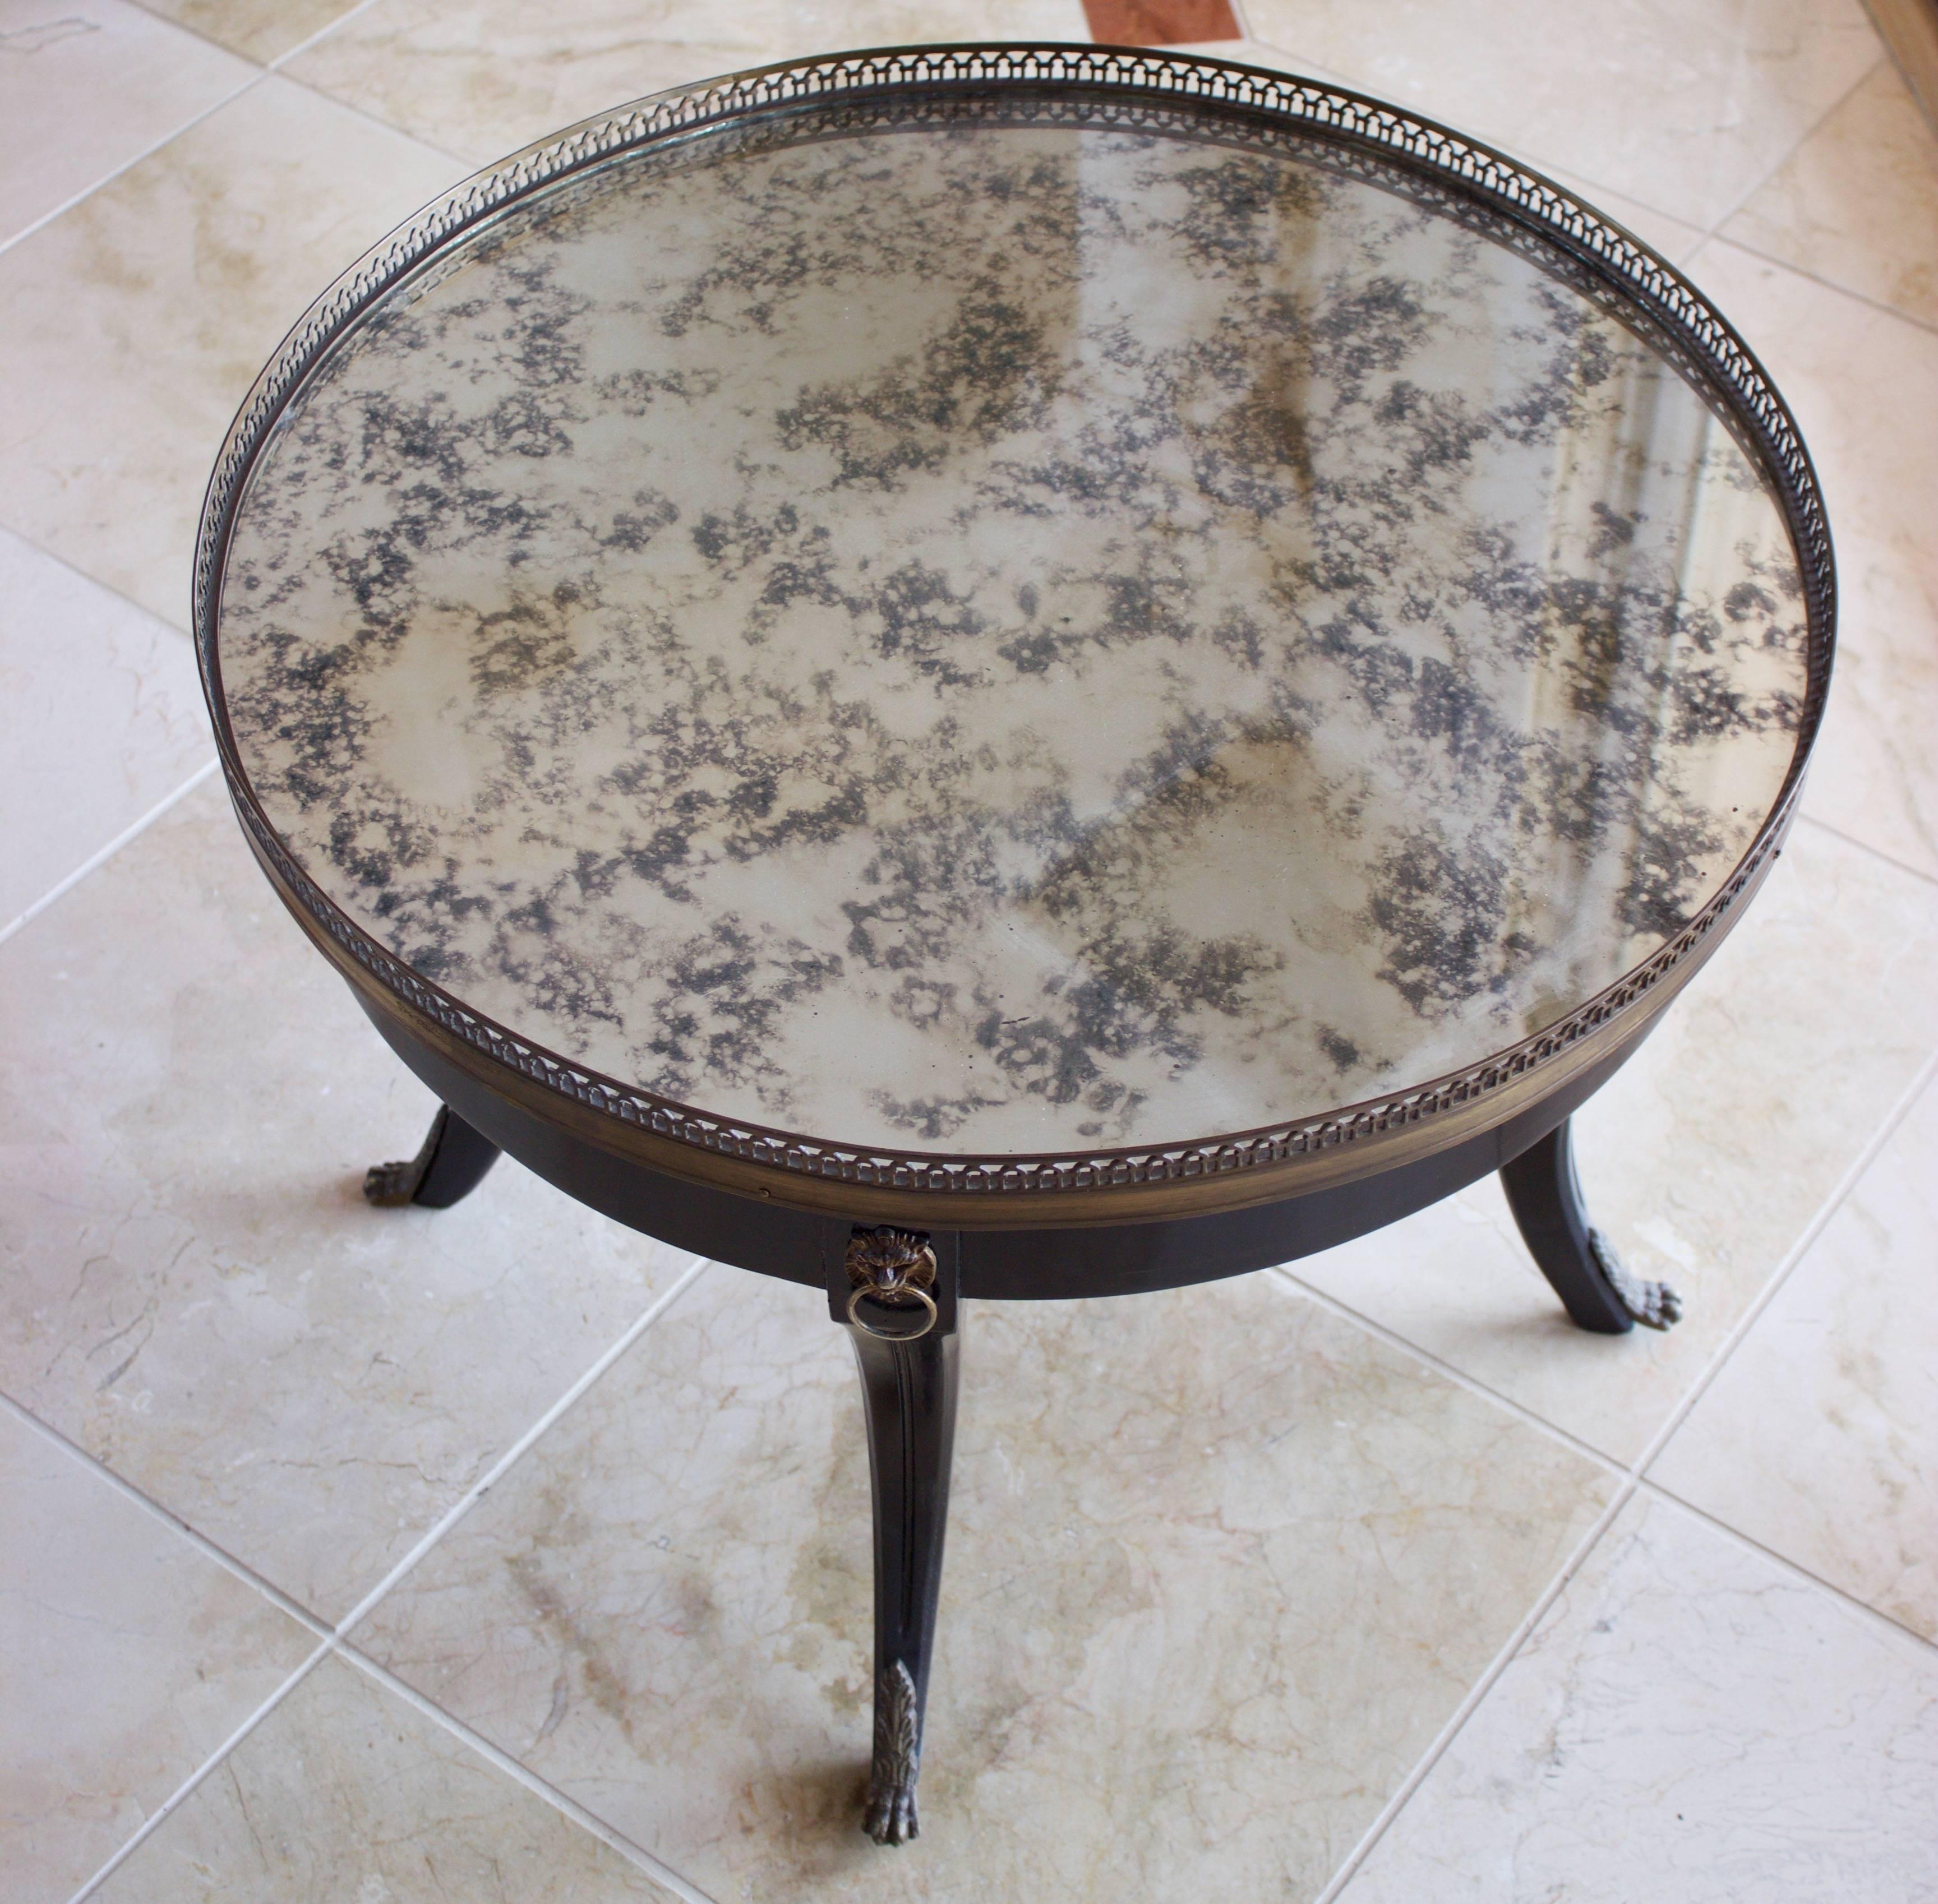 In Maison Jansen style, small round ebonized table with a gorgeous antique silvered mirror glass top surrounded by an openwork bronze gallery. Resting on four arched legs adorned each by a lion's head at top and Lion's foot at bottom.